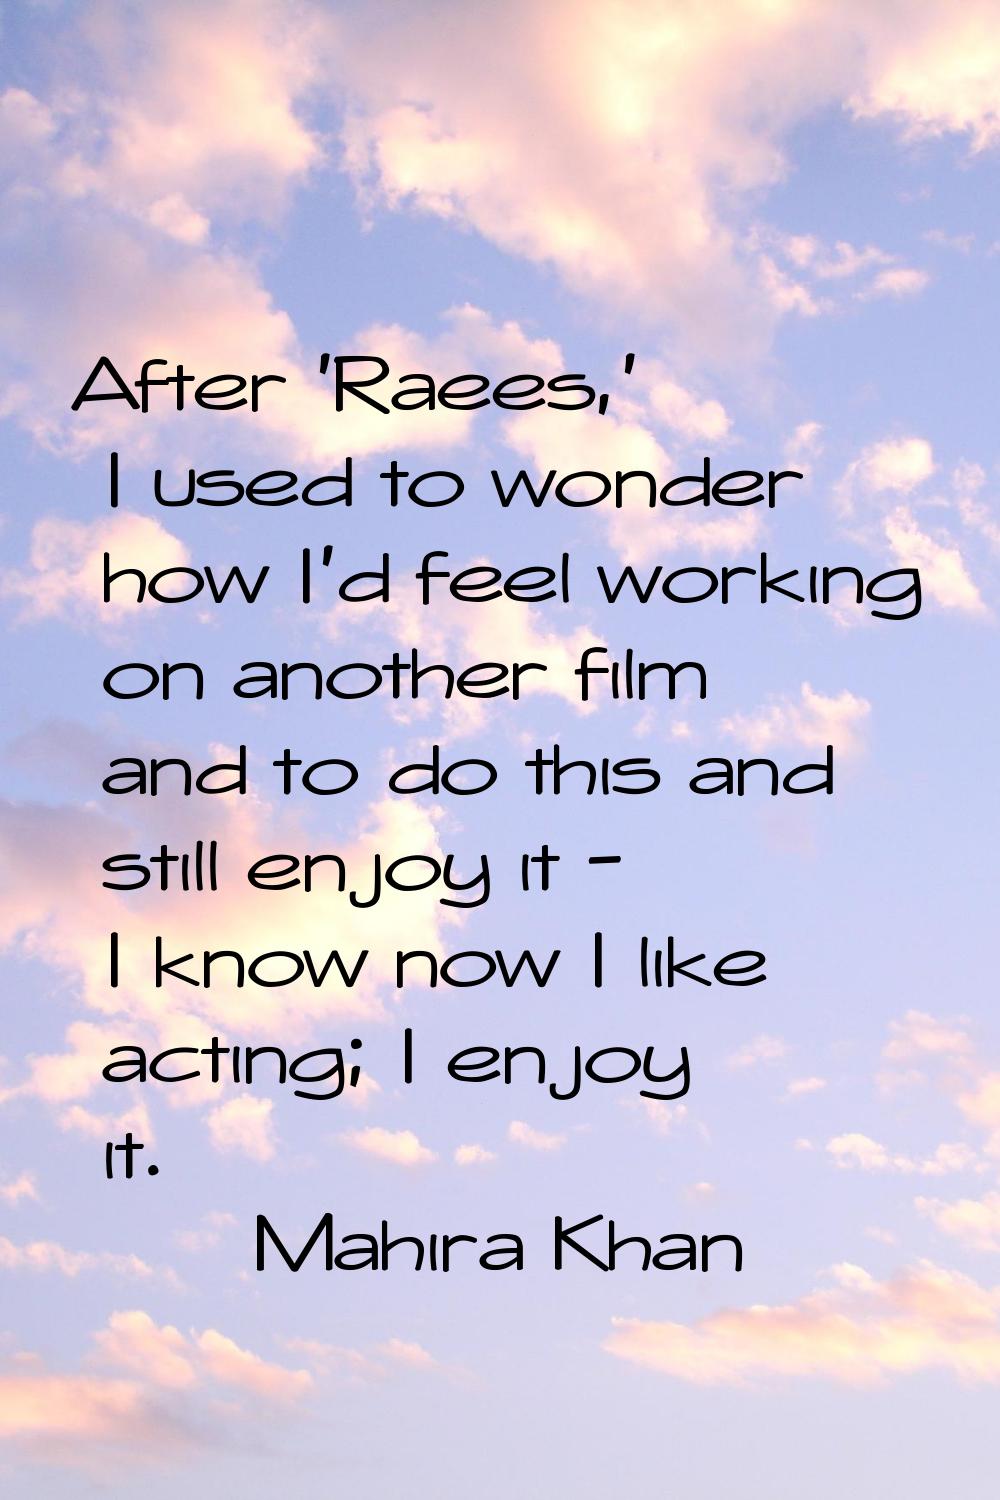 After 'Raees,' I used to wonder how I'd feel working on another film and to do this and still enjoy